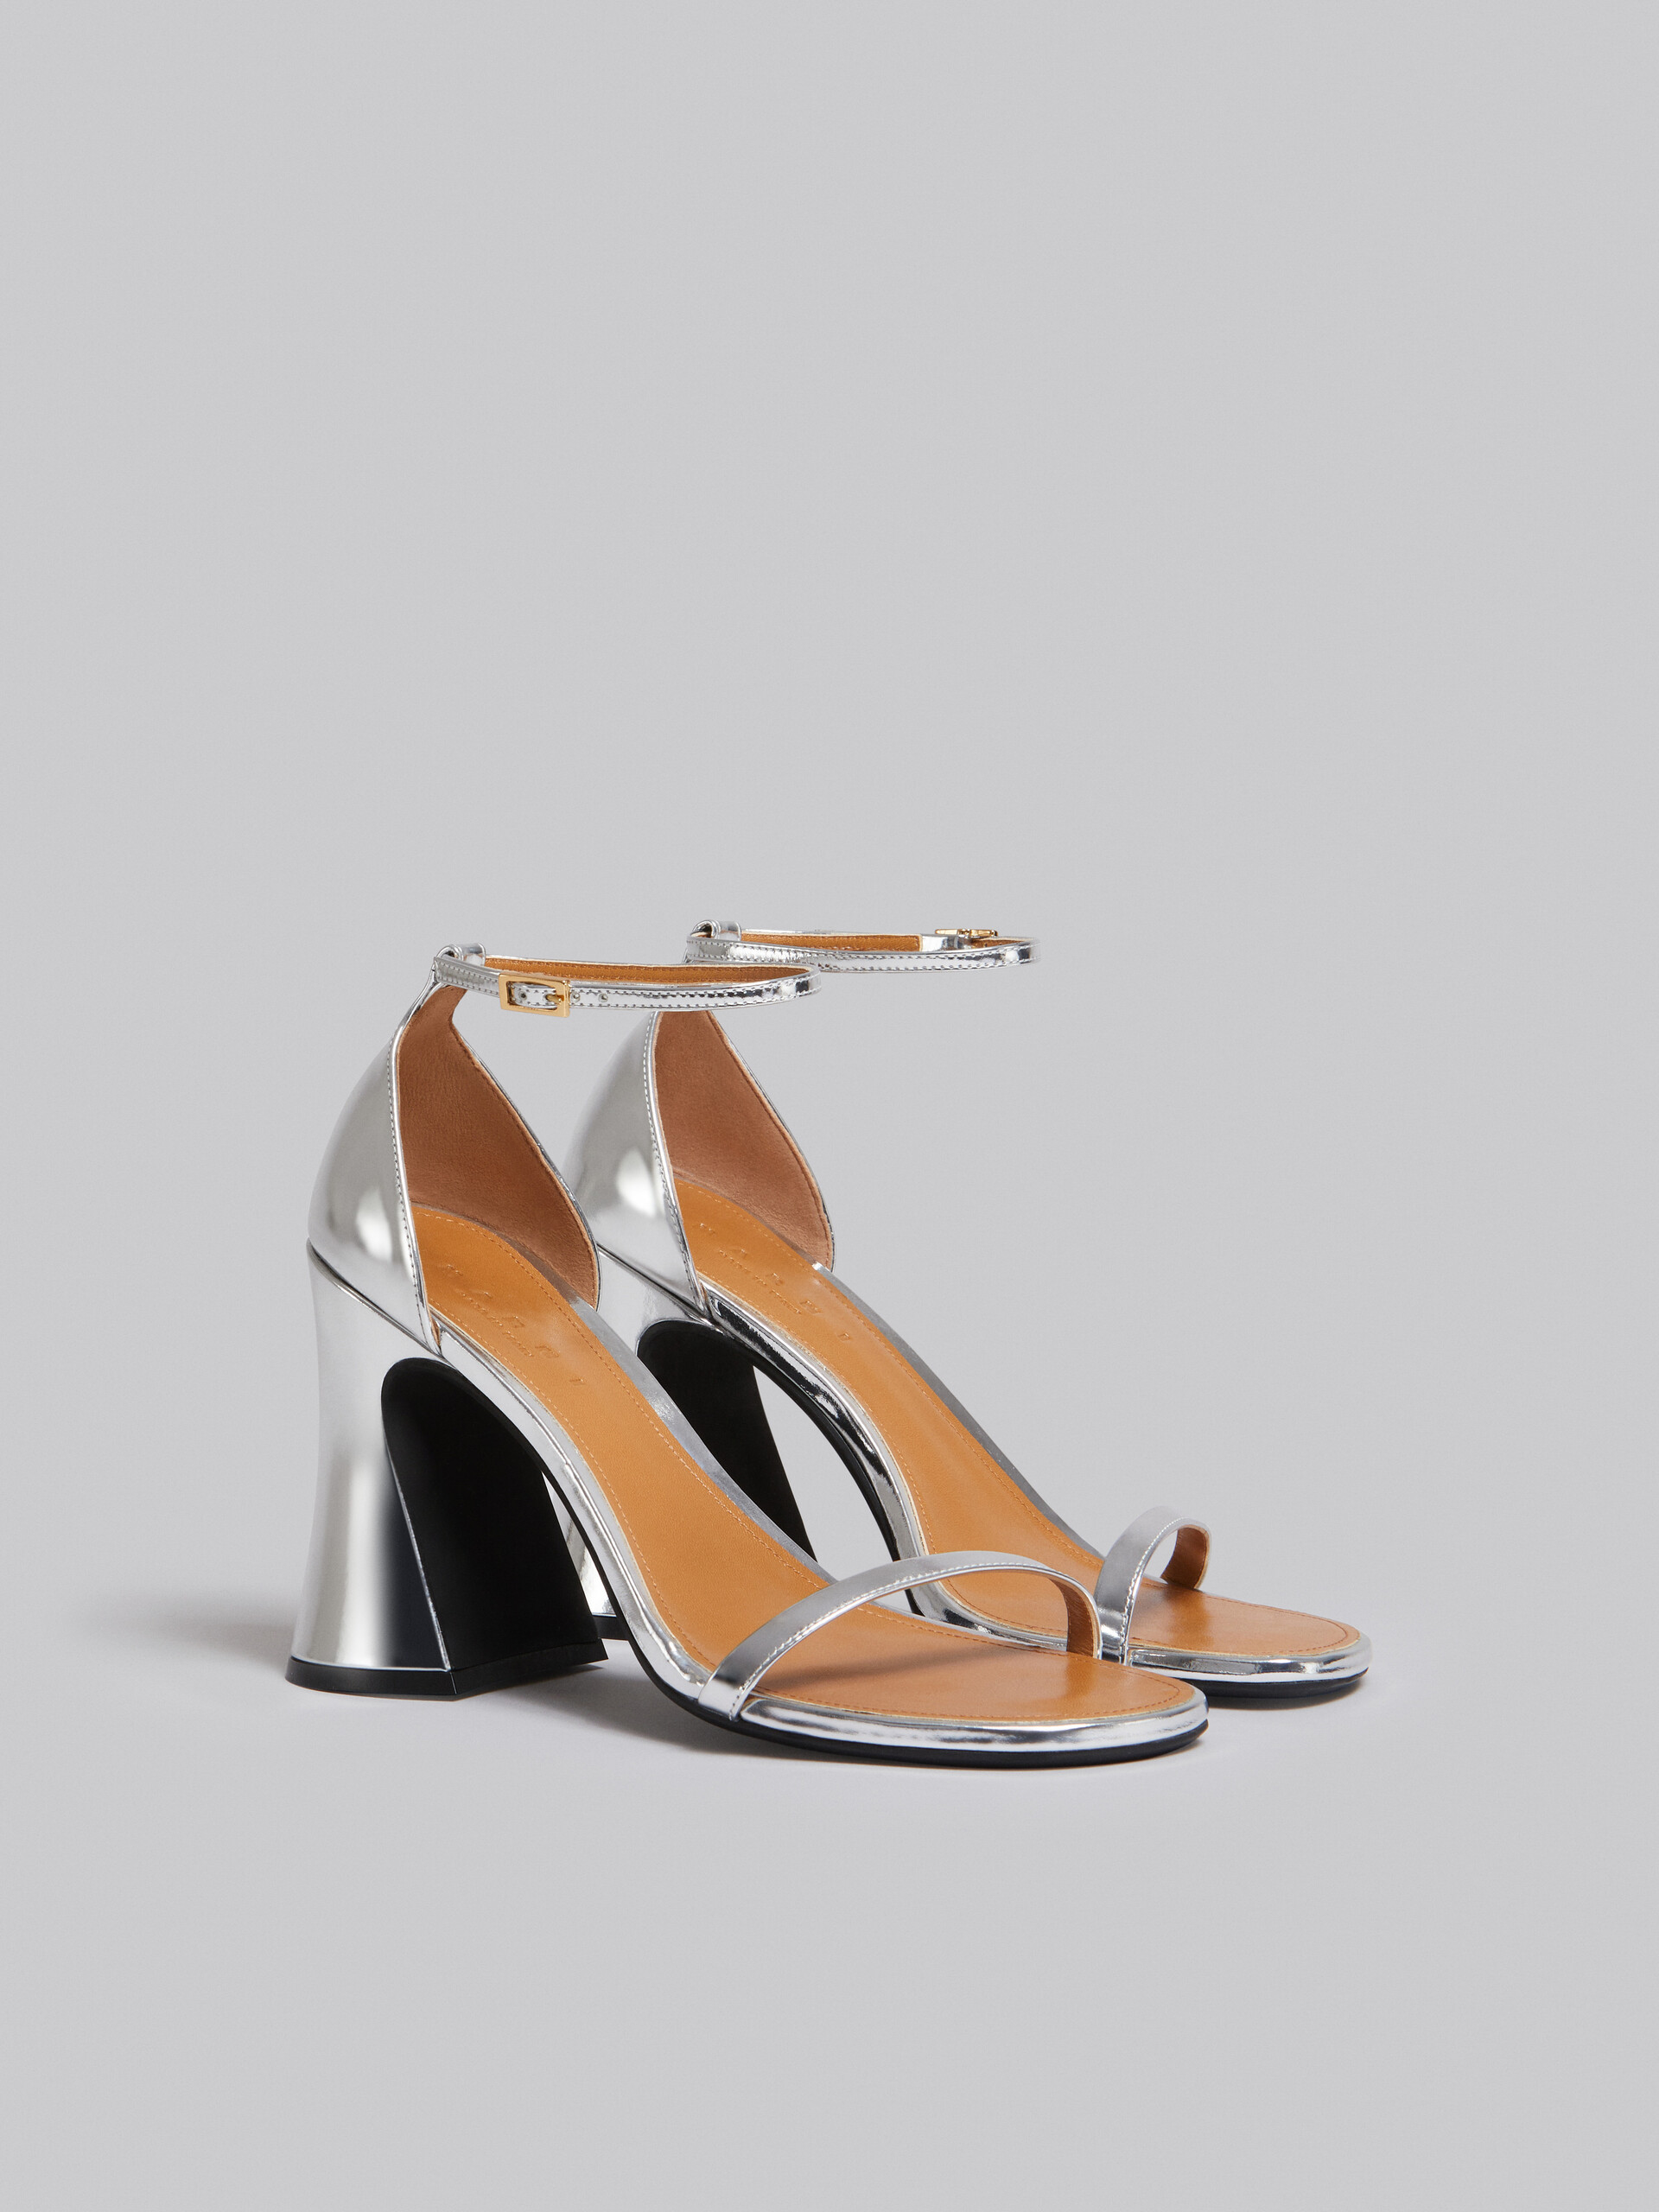 Silver mirrored leather sandal - Sandals - Image 2